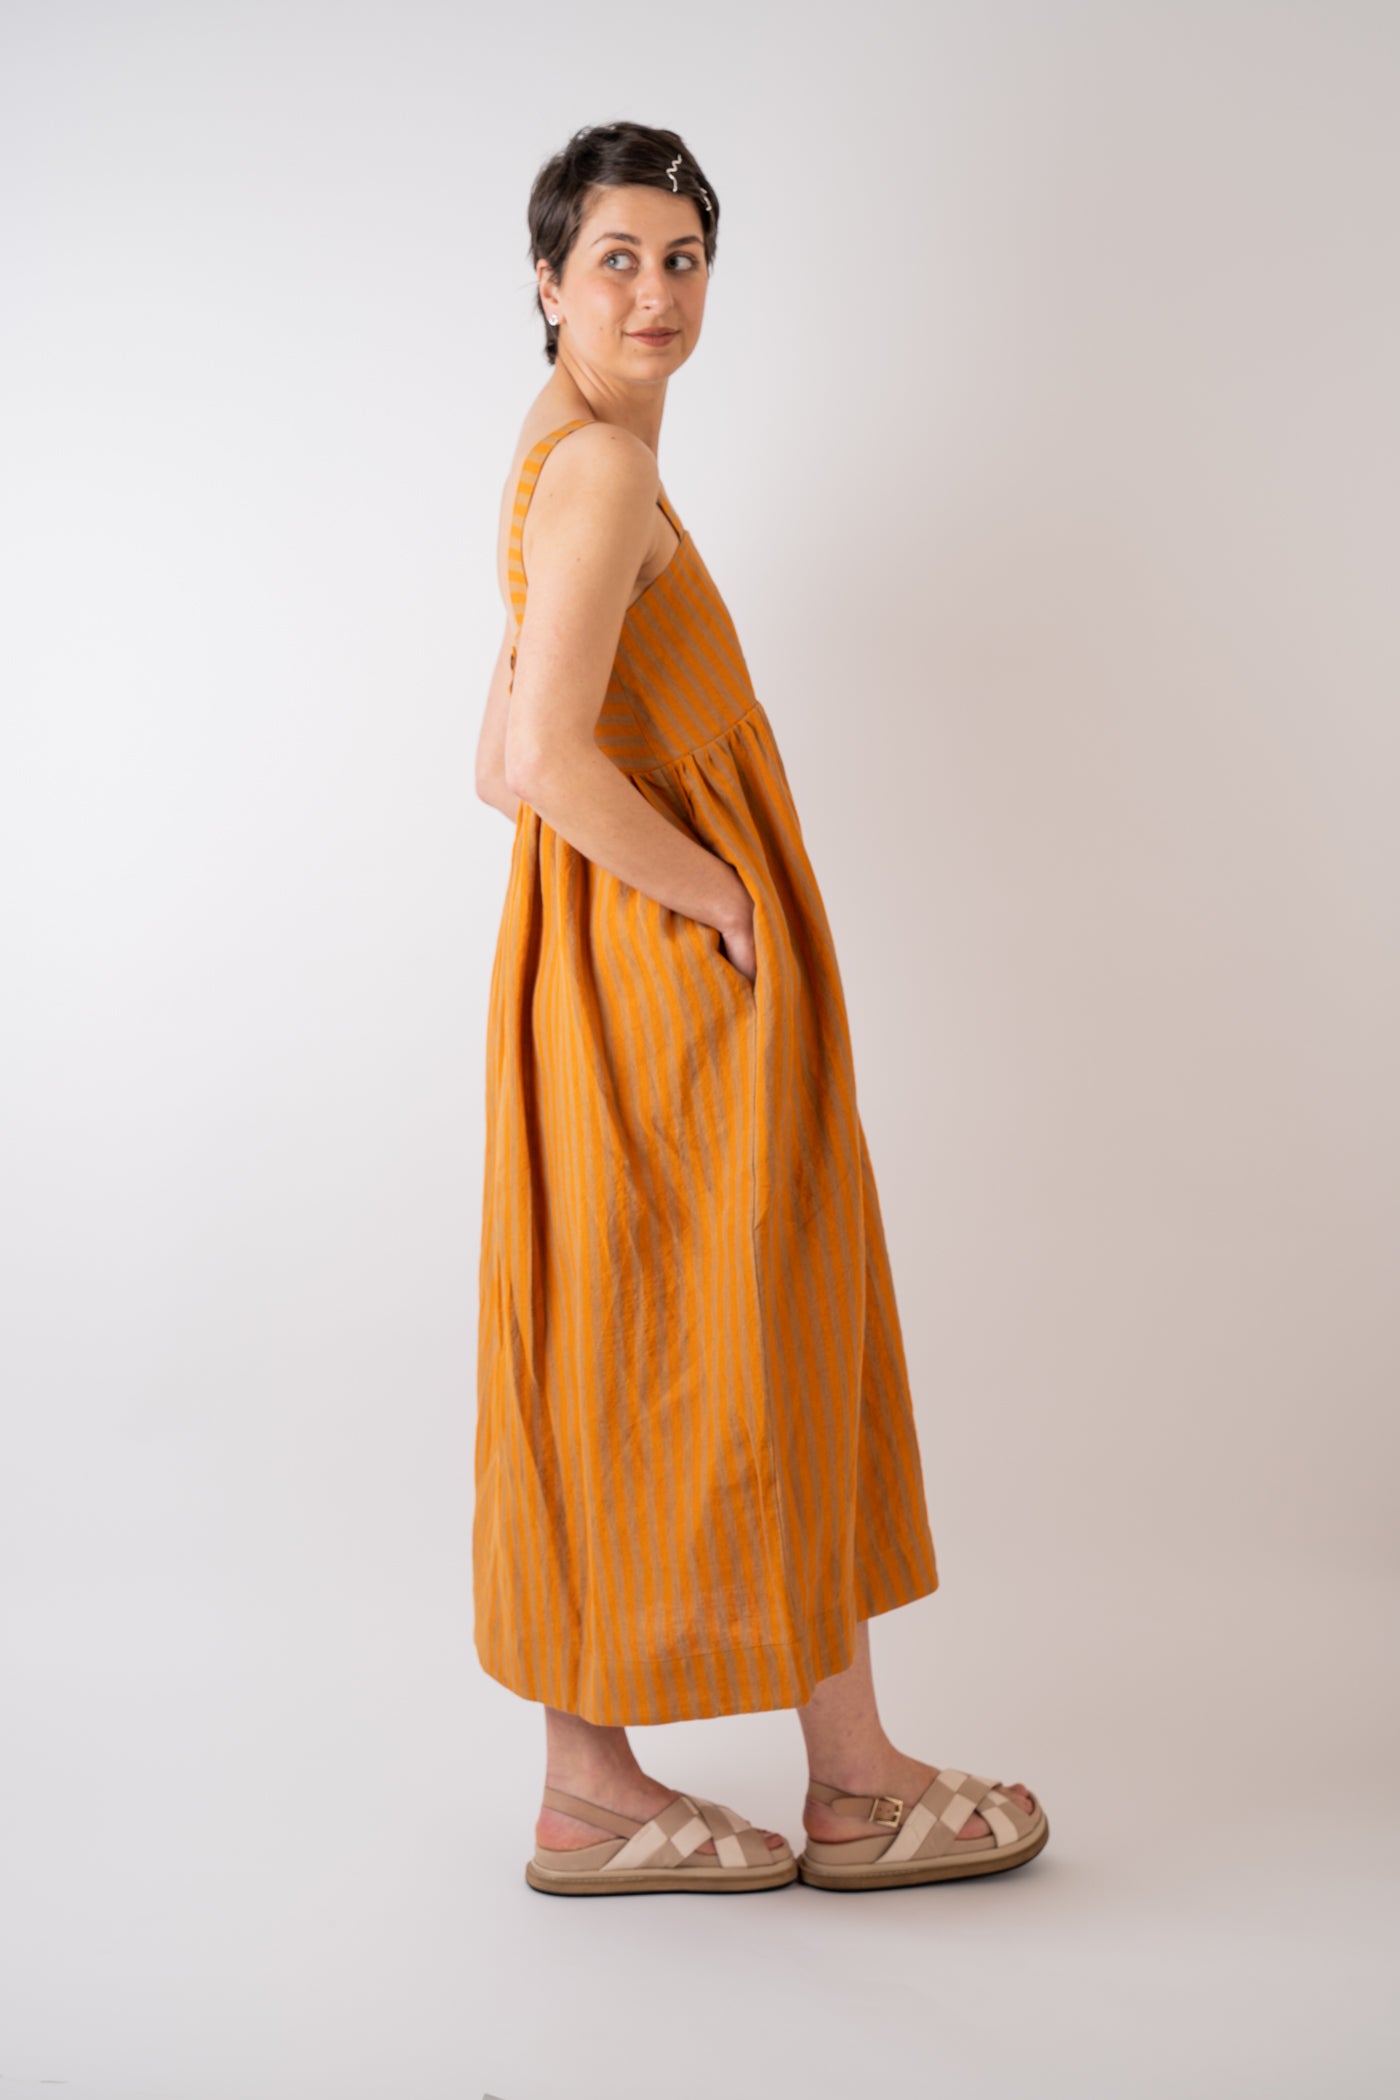 Cawley Studio 100% Irish Stripe Linen Elba Dress in Orange and Terracotta handmade in London with coroza button back fastening detail and side pockets